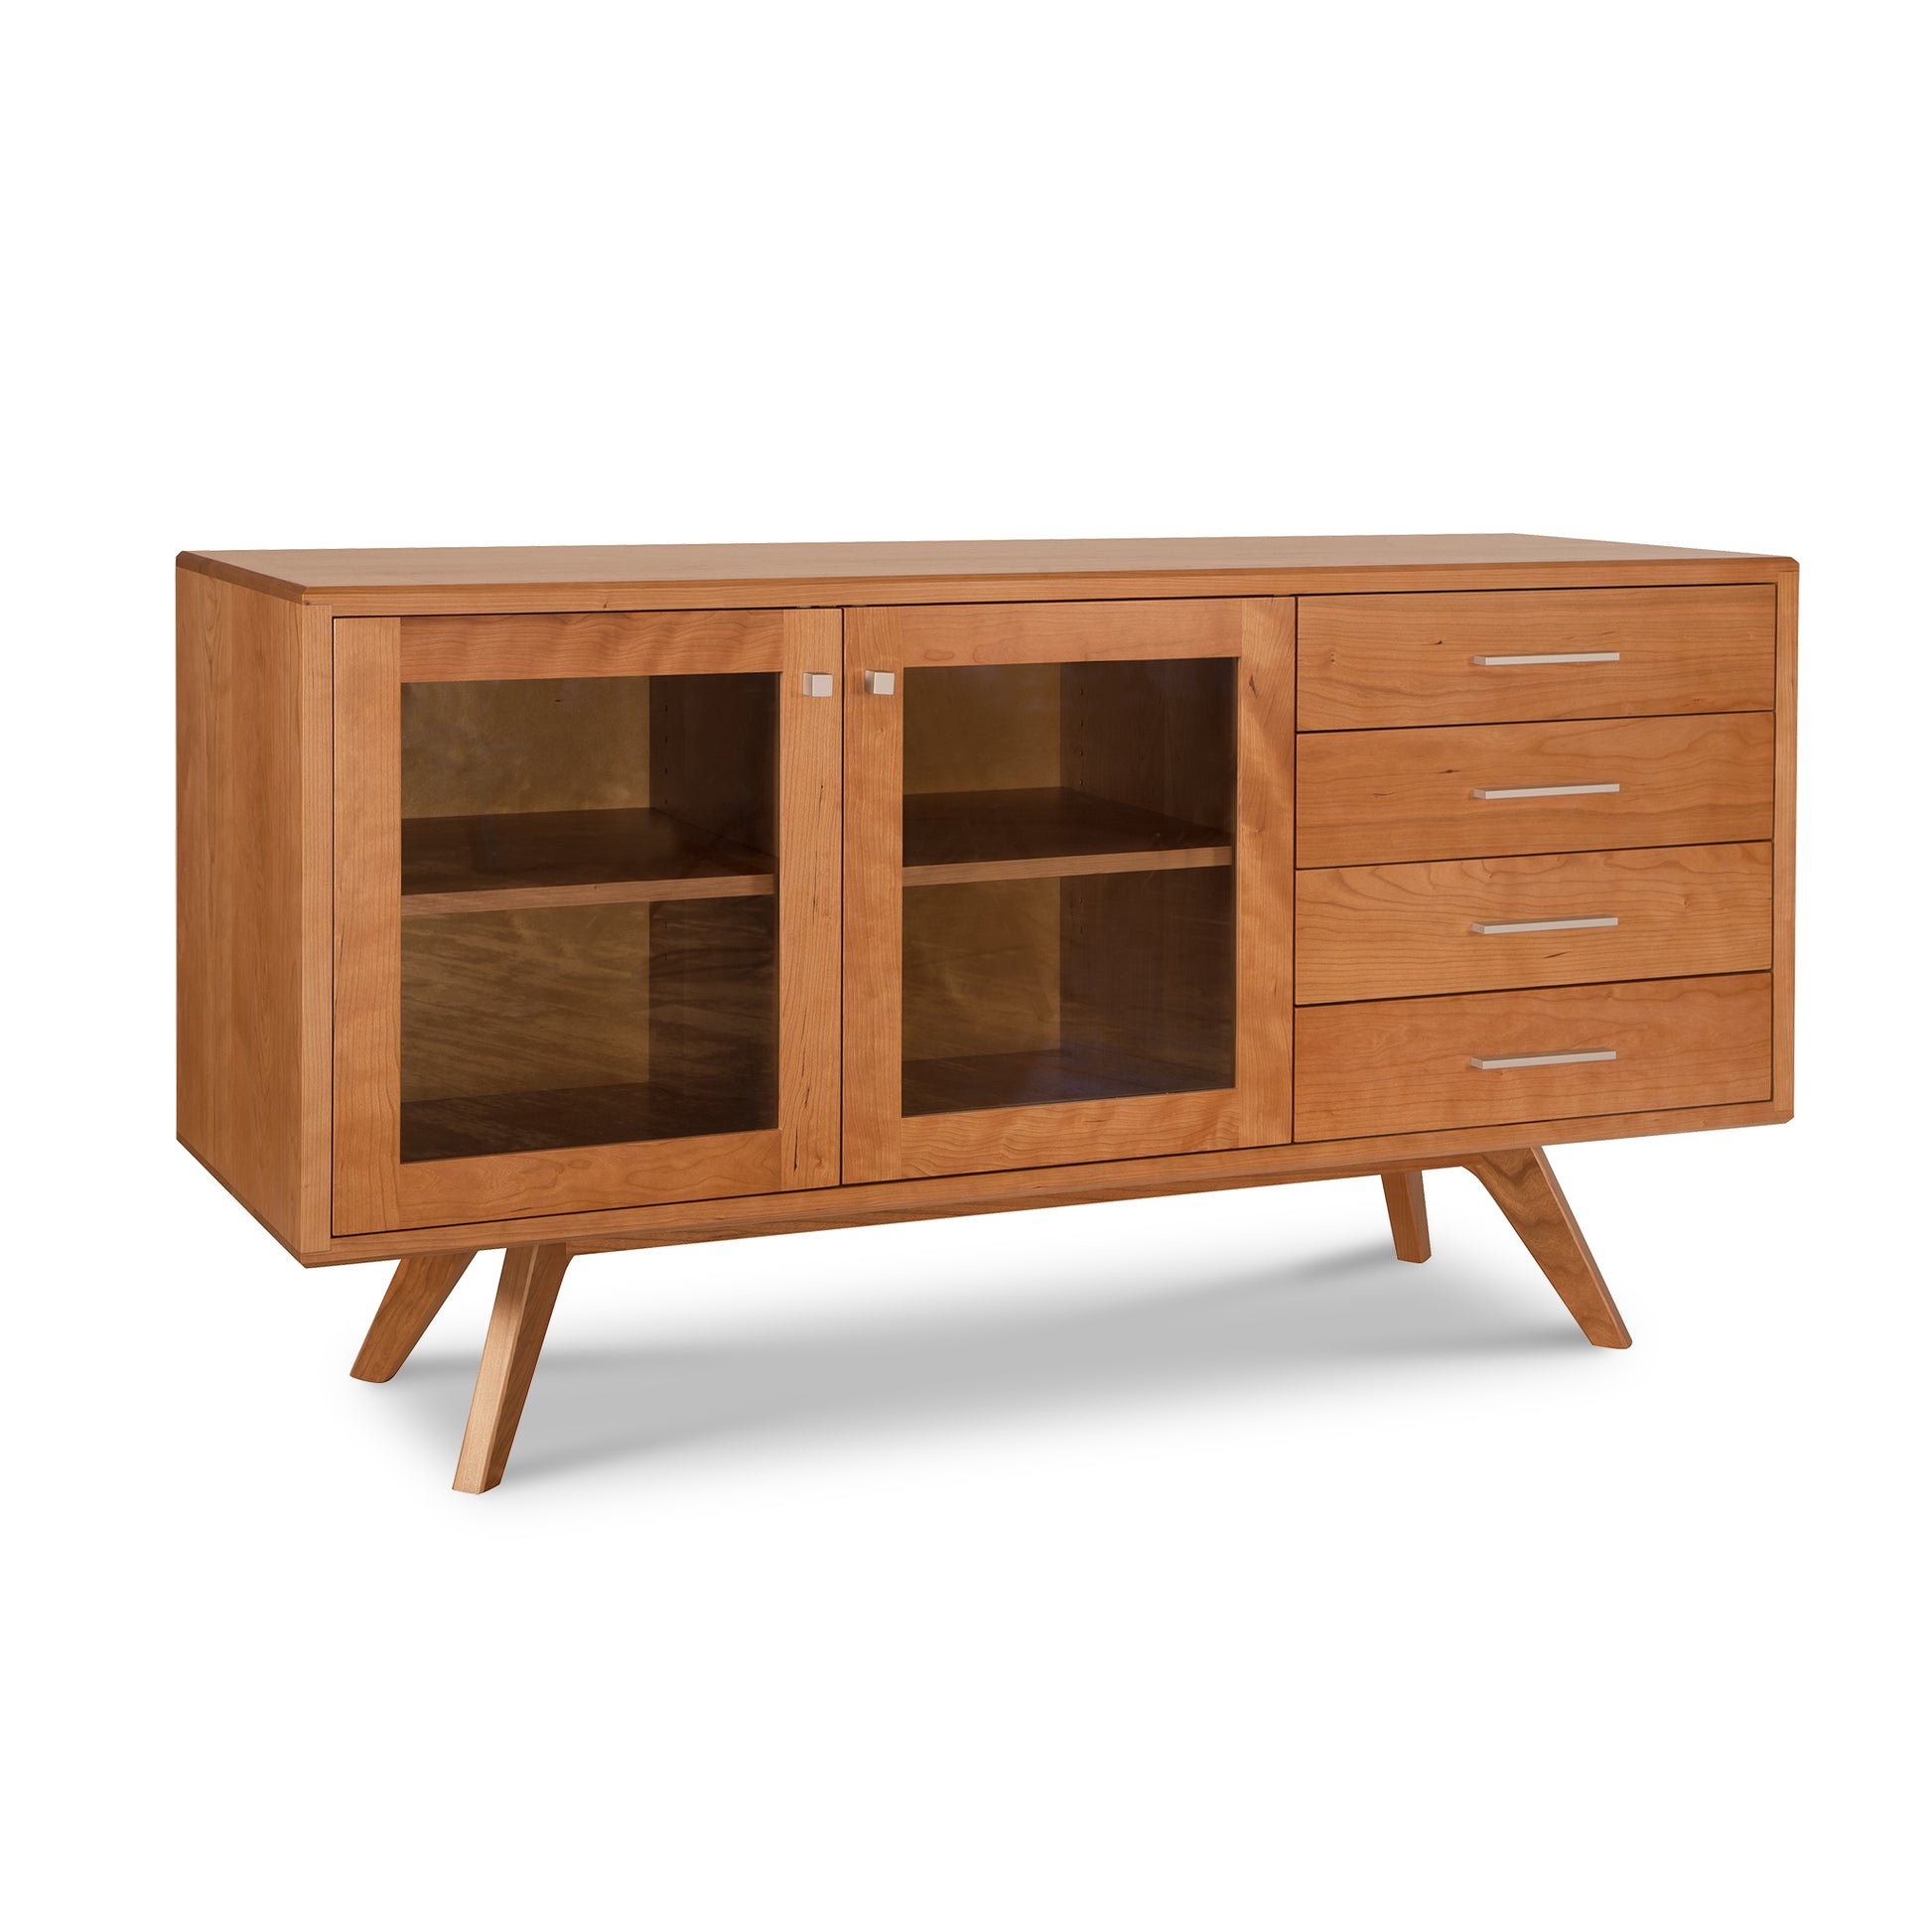 A mid-century modern Brighton Buffet by Lyndon Furniture with glass doors and drawers, providing ample storage space.